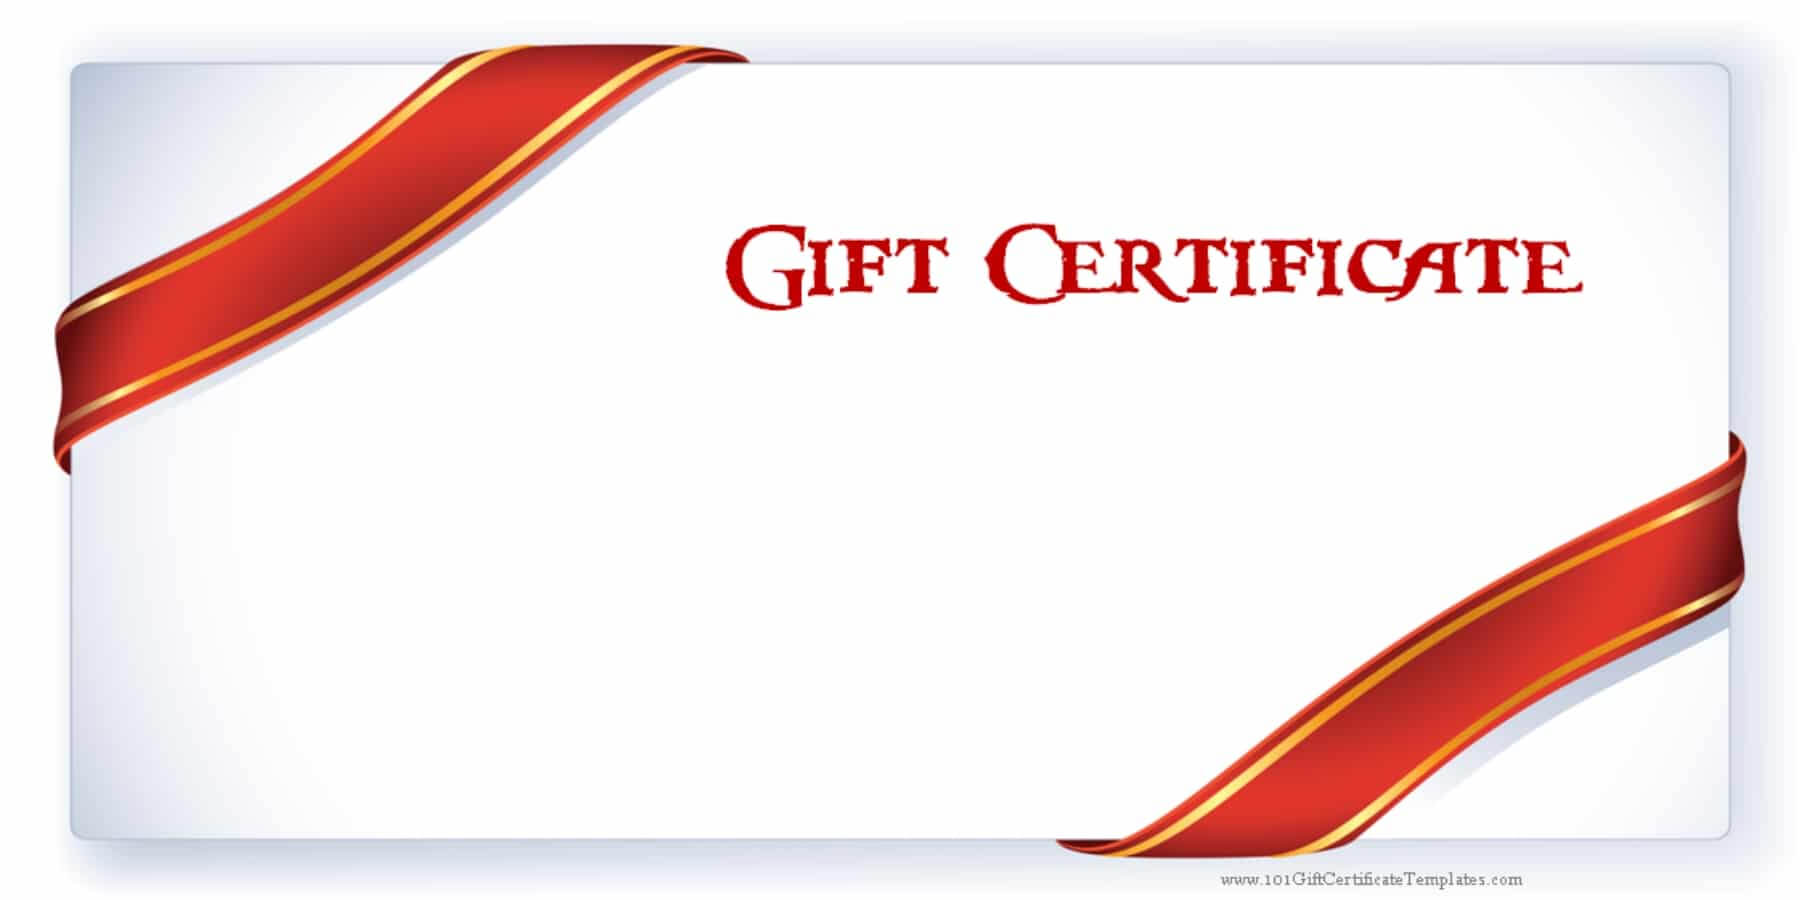 Printable Gift Certificate Templates For Printable Gift Certificates Templates Free